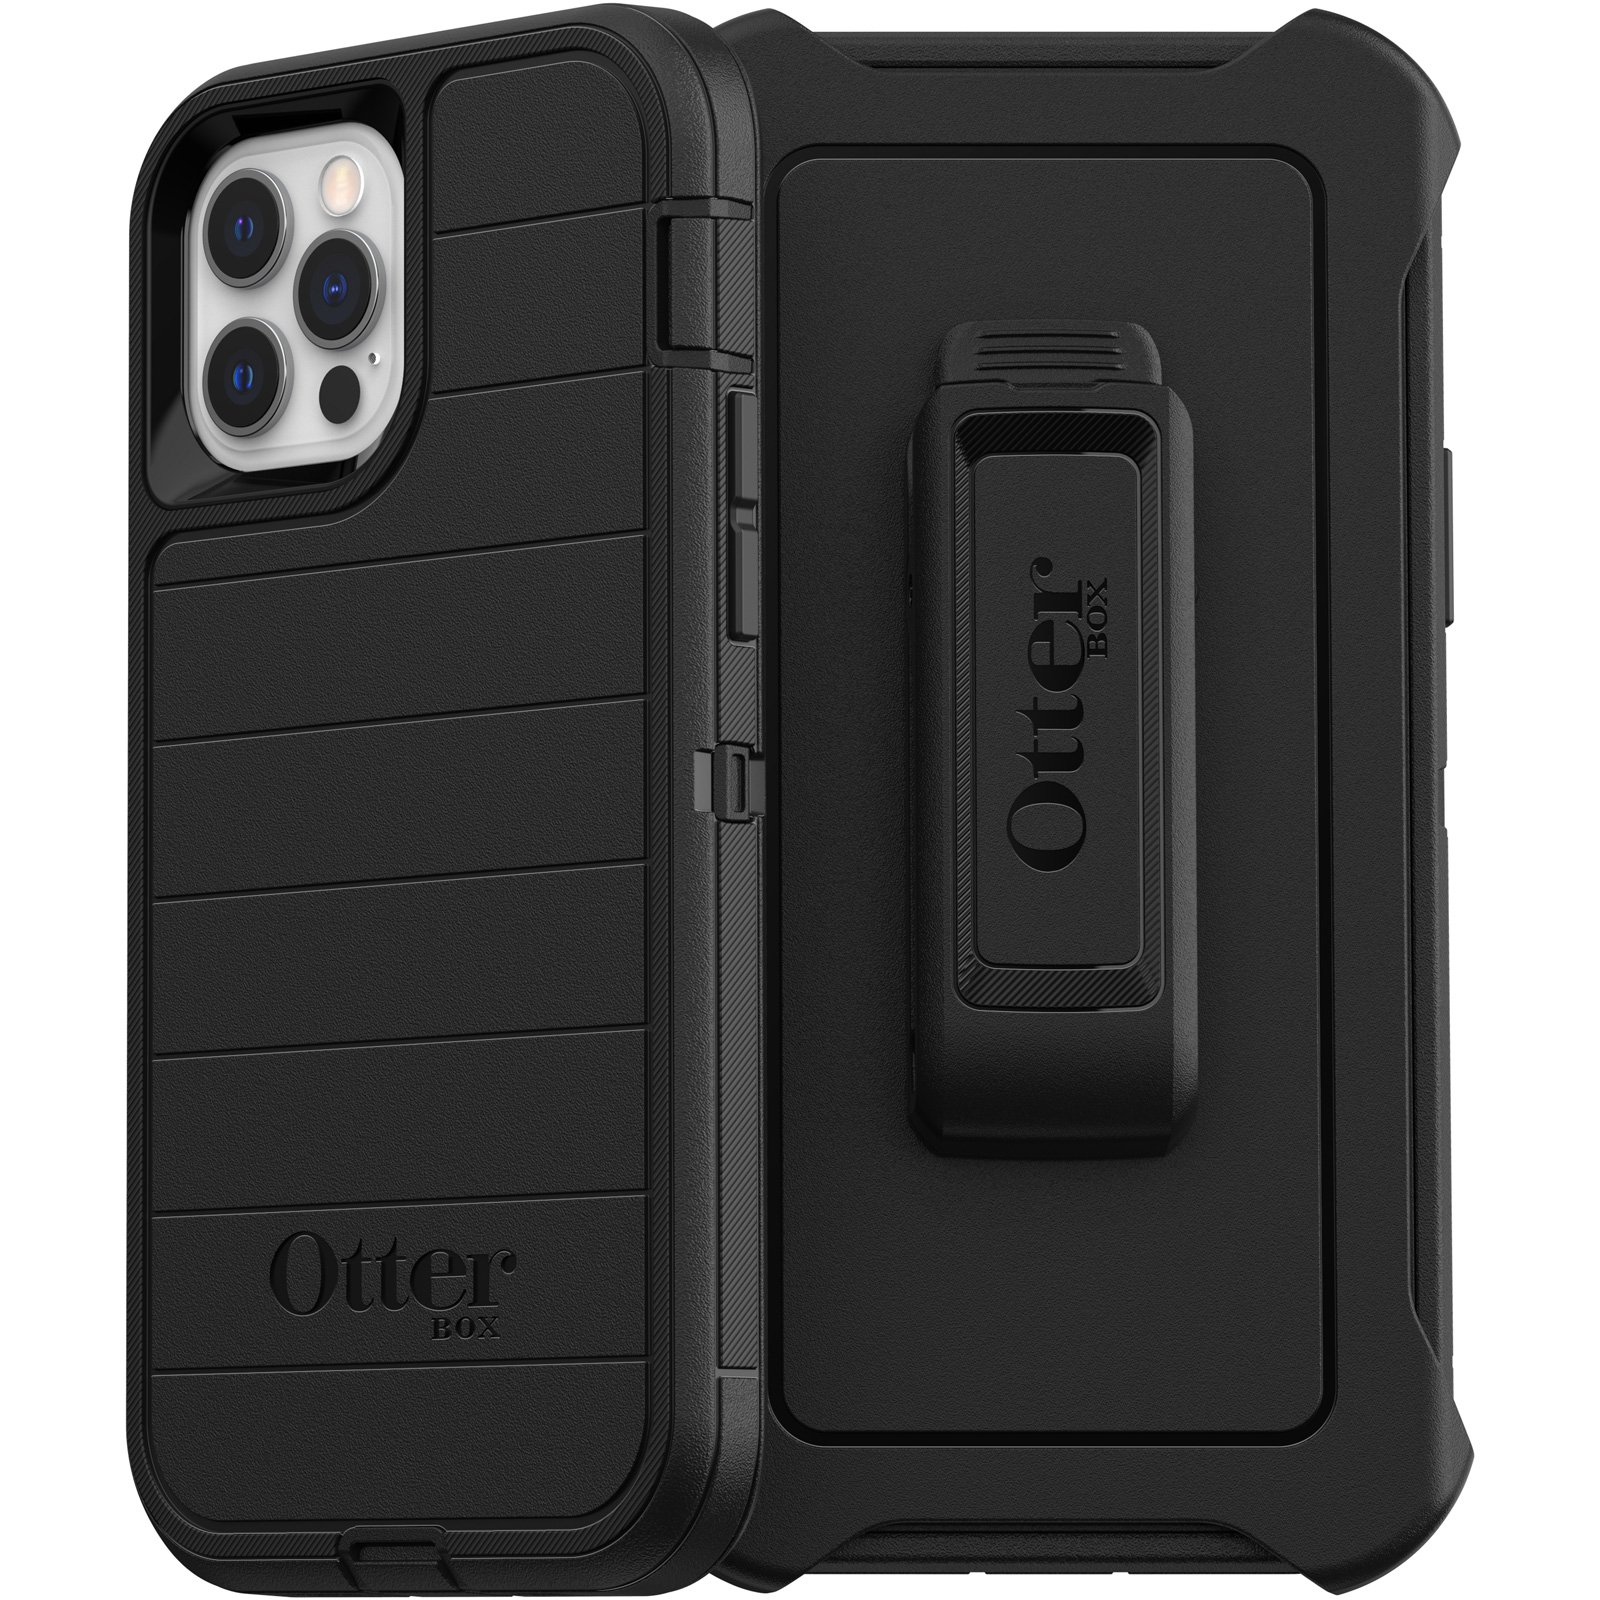 Black Rugged iPhone 12 Case | OtterBox Defender Series Pro